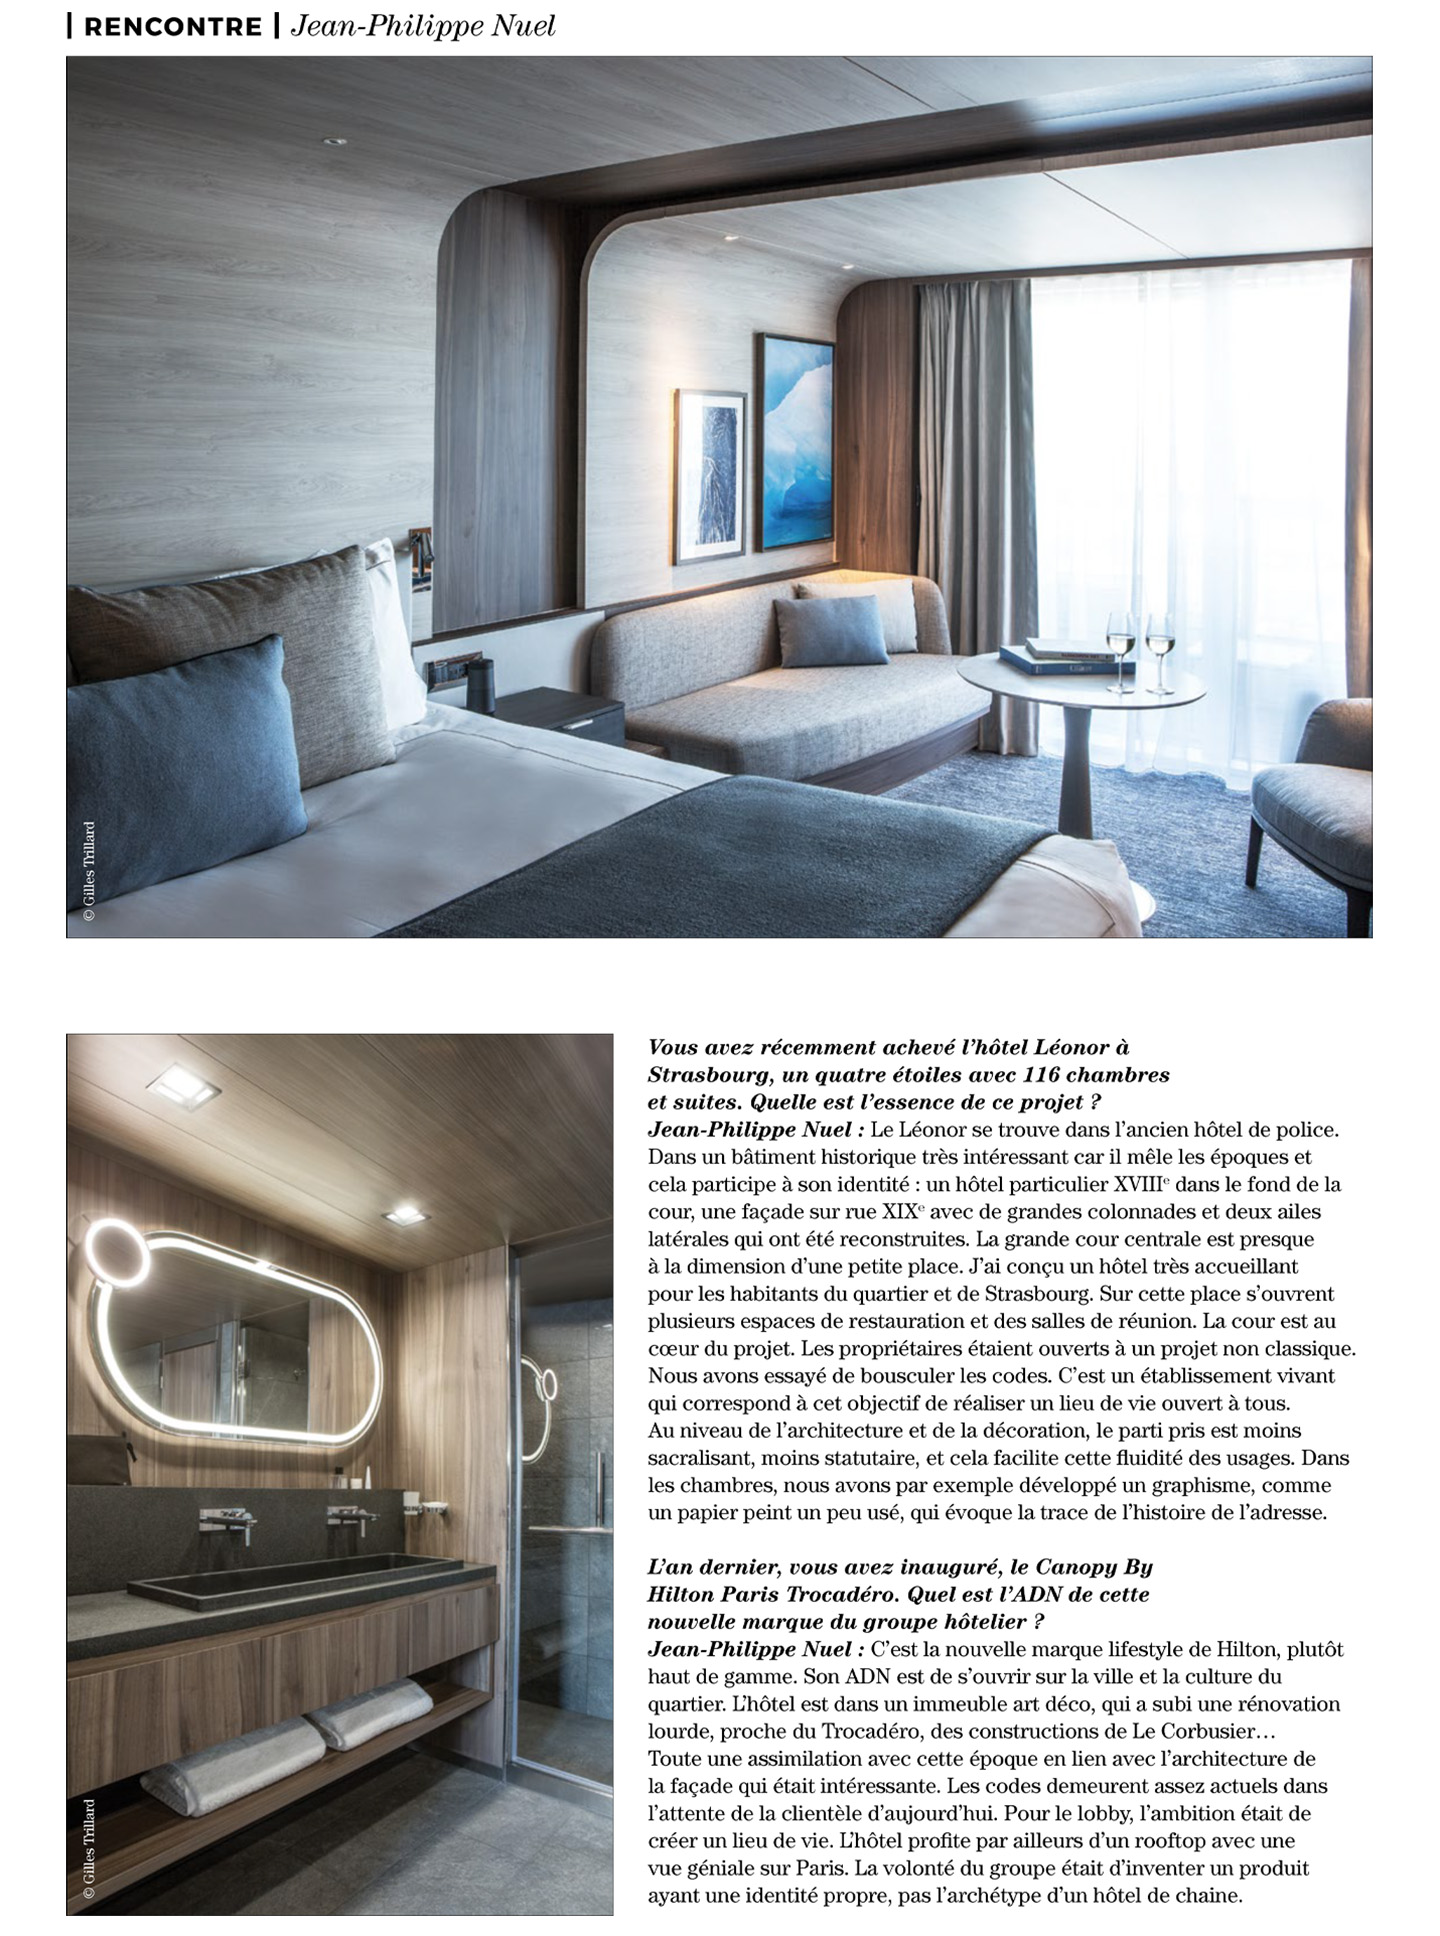 article on jean-philippe nuel and his interior design agency in artravel magazine